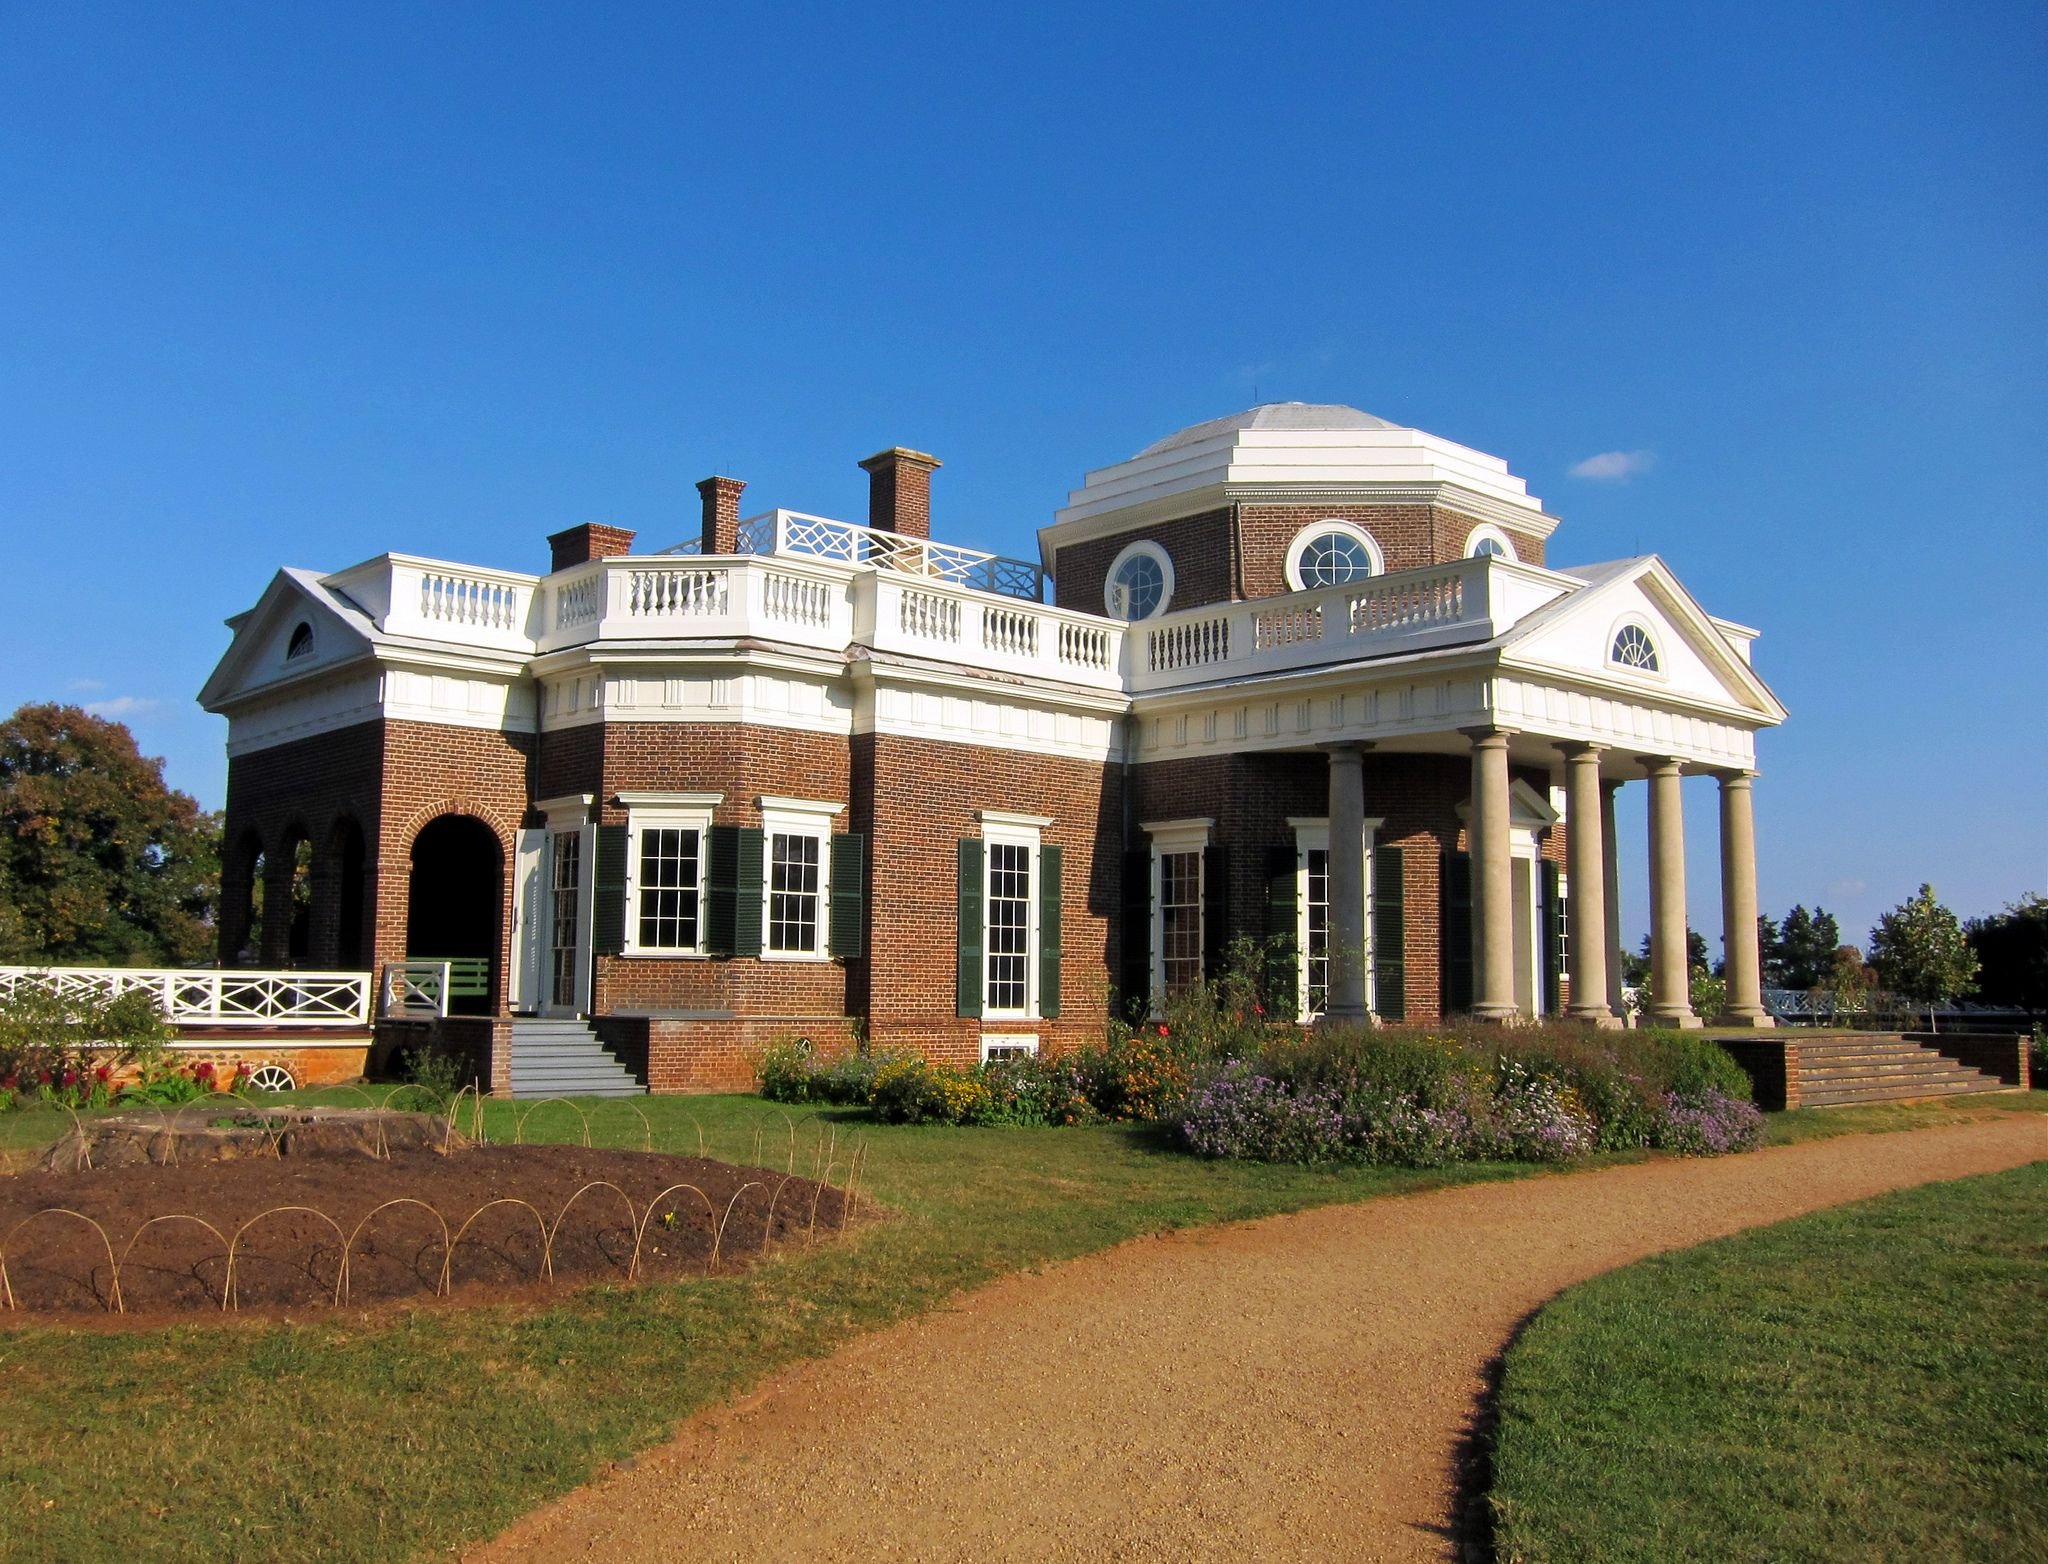 A Complete Guide to Monticello: The Historic Home of Thomas Jefferson